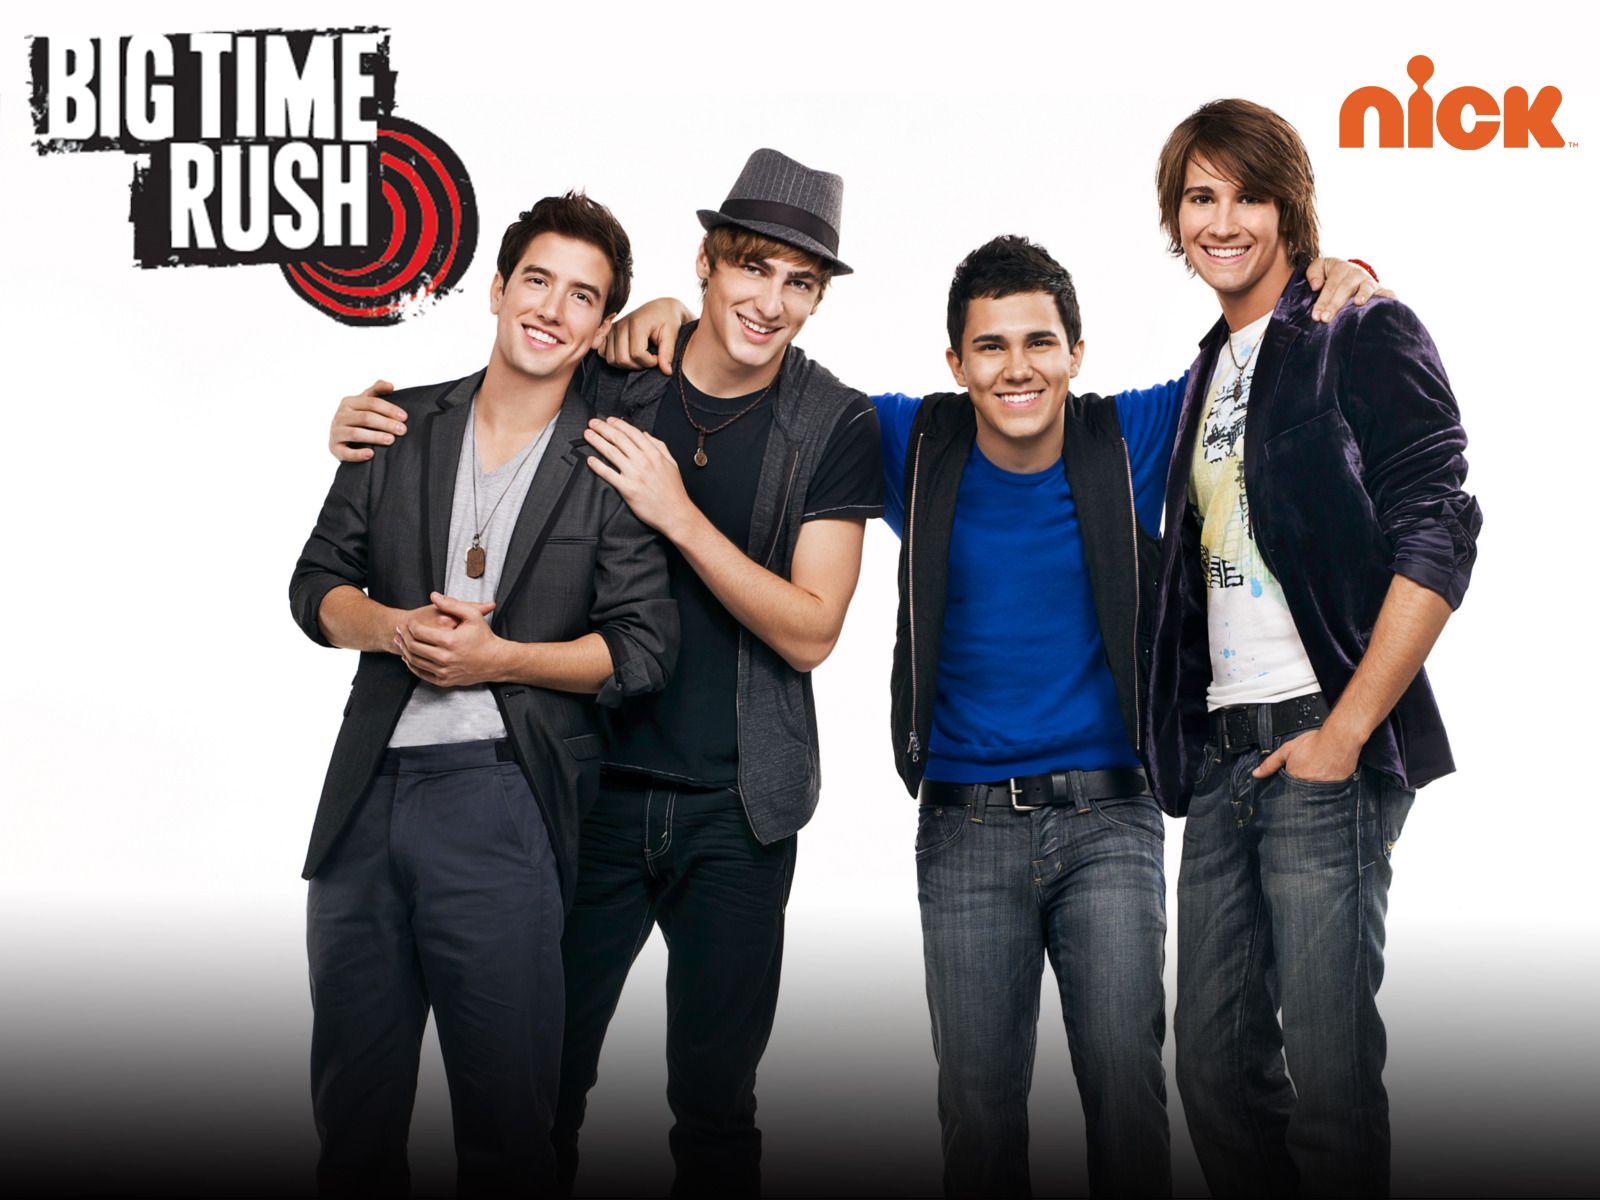 How to Watch Big Time Rush on Netflix - Best VPNs To Use